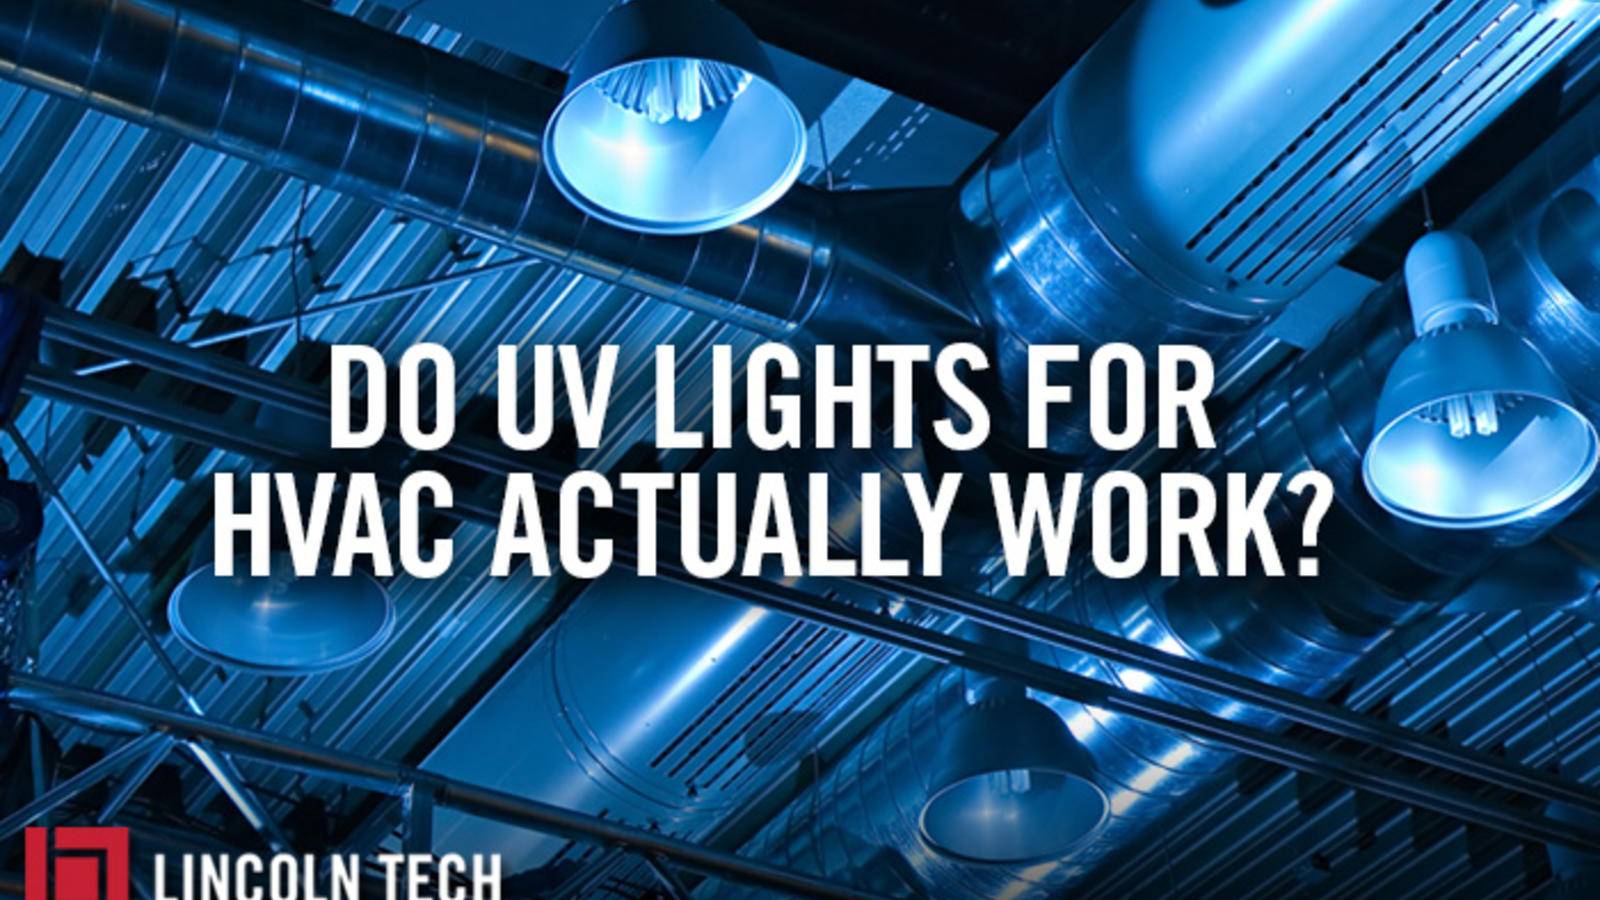 How Much Do UV Lights Cost for HVAC Systems?